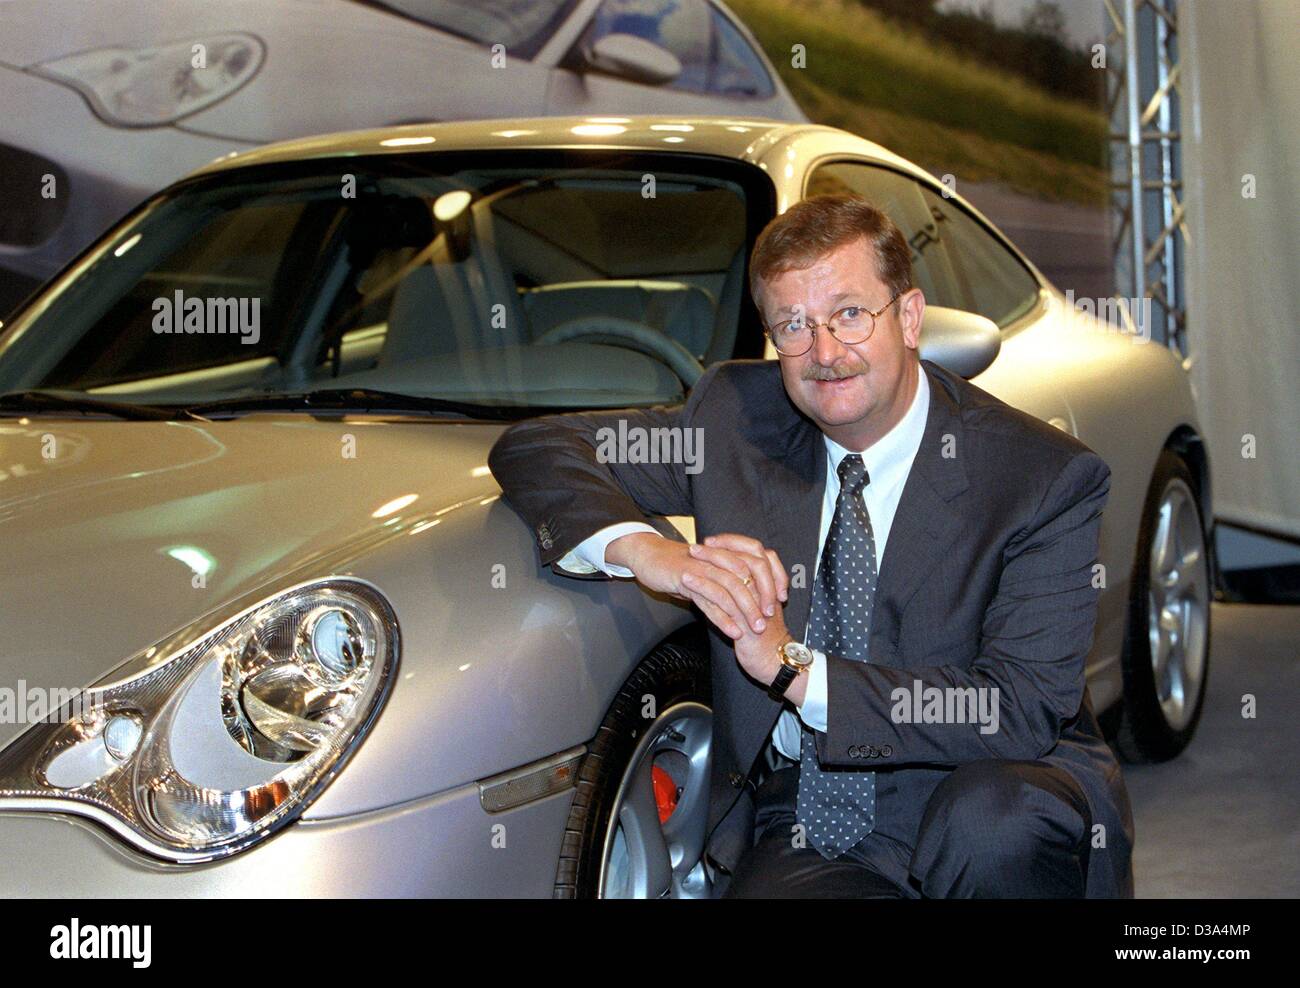 (dpa) - Wendelin Wiedeking, CEO of the German sports car manufacturer Porsche, is posing next to a 911 Carrera 4S at the International Motor Show in Frankfurt, September 2001. The supervisory board recently extended Wiedeking's contract until 2007. Under his management Porsche has become one of the  Stock Photo